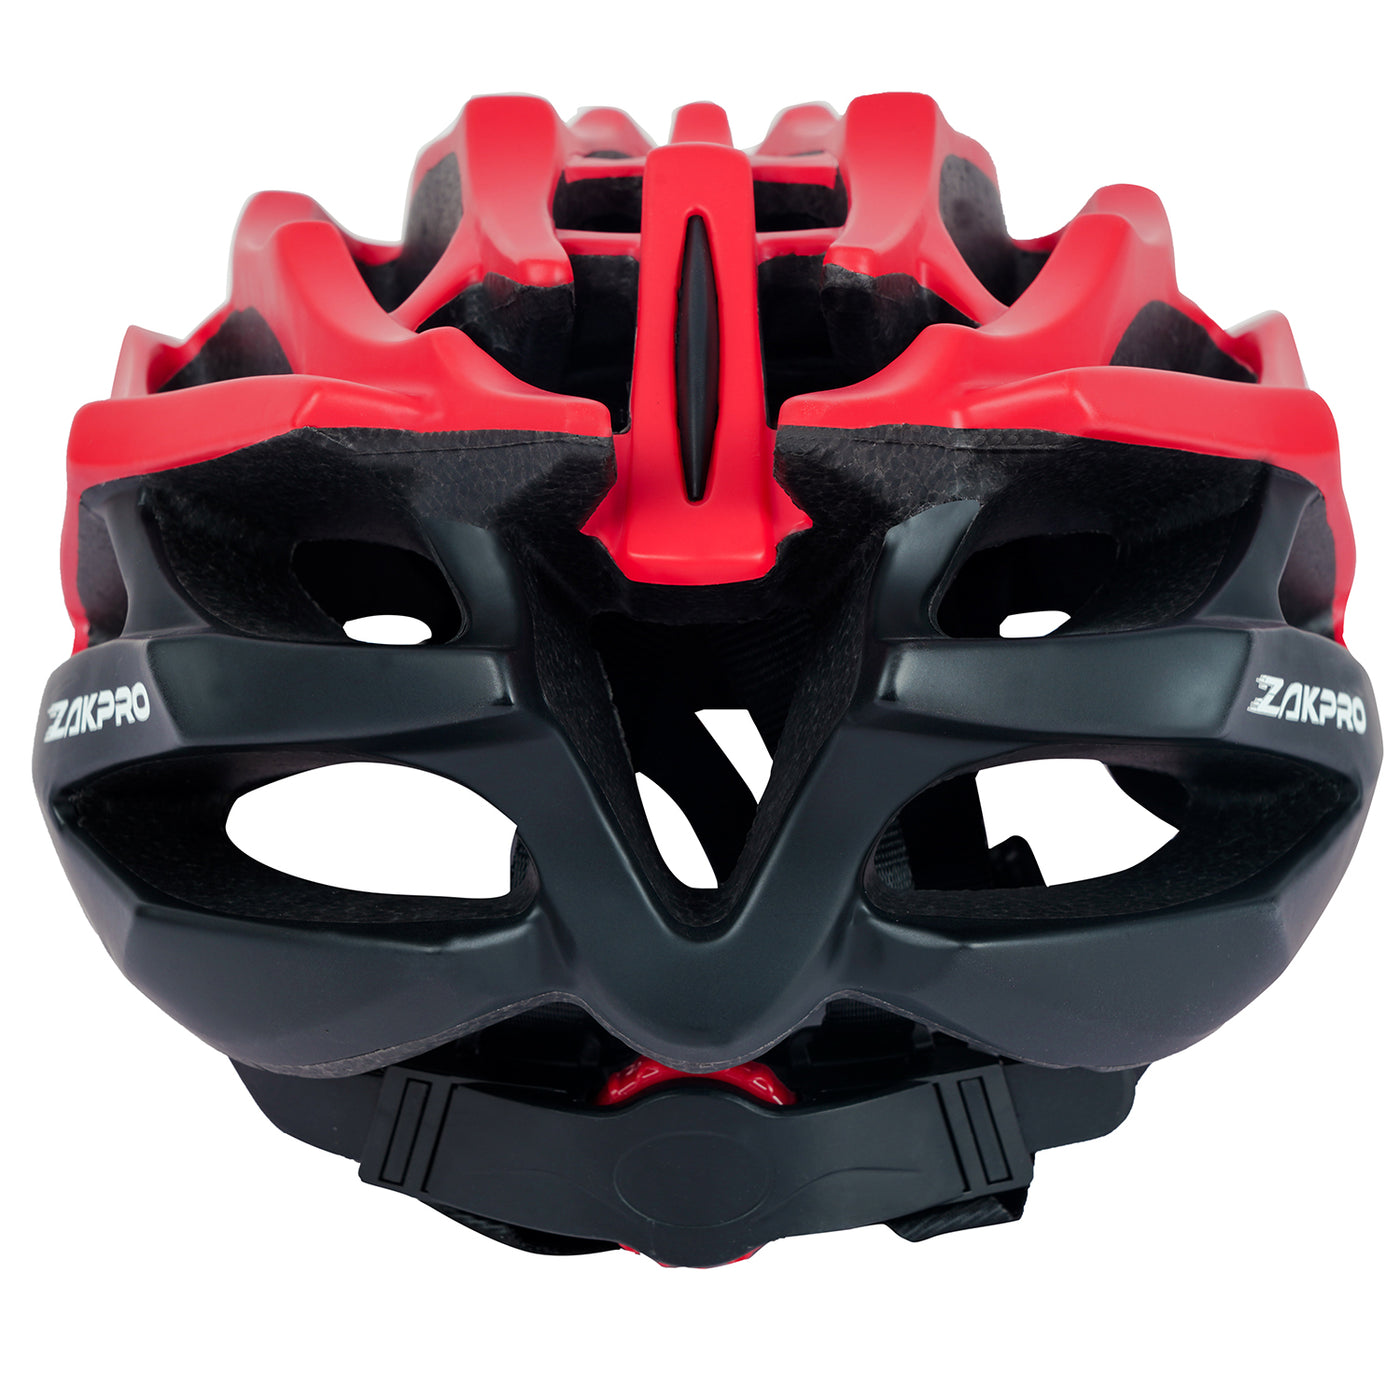 Zakpro Signature Road Cycling Helmet (Red)